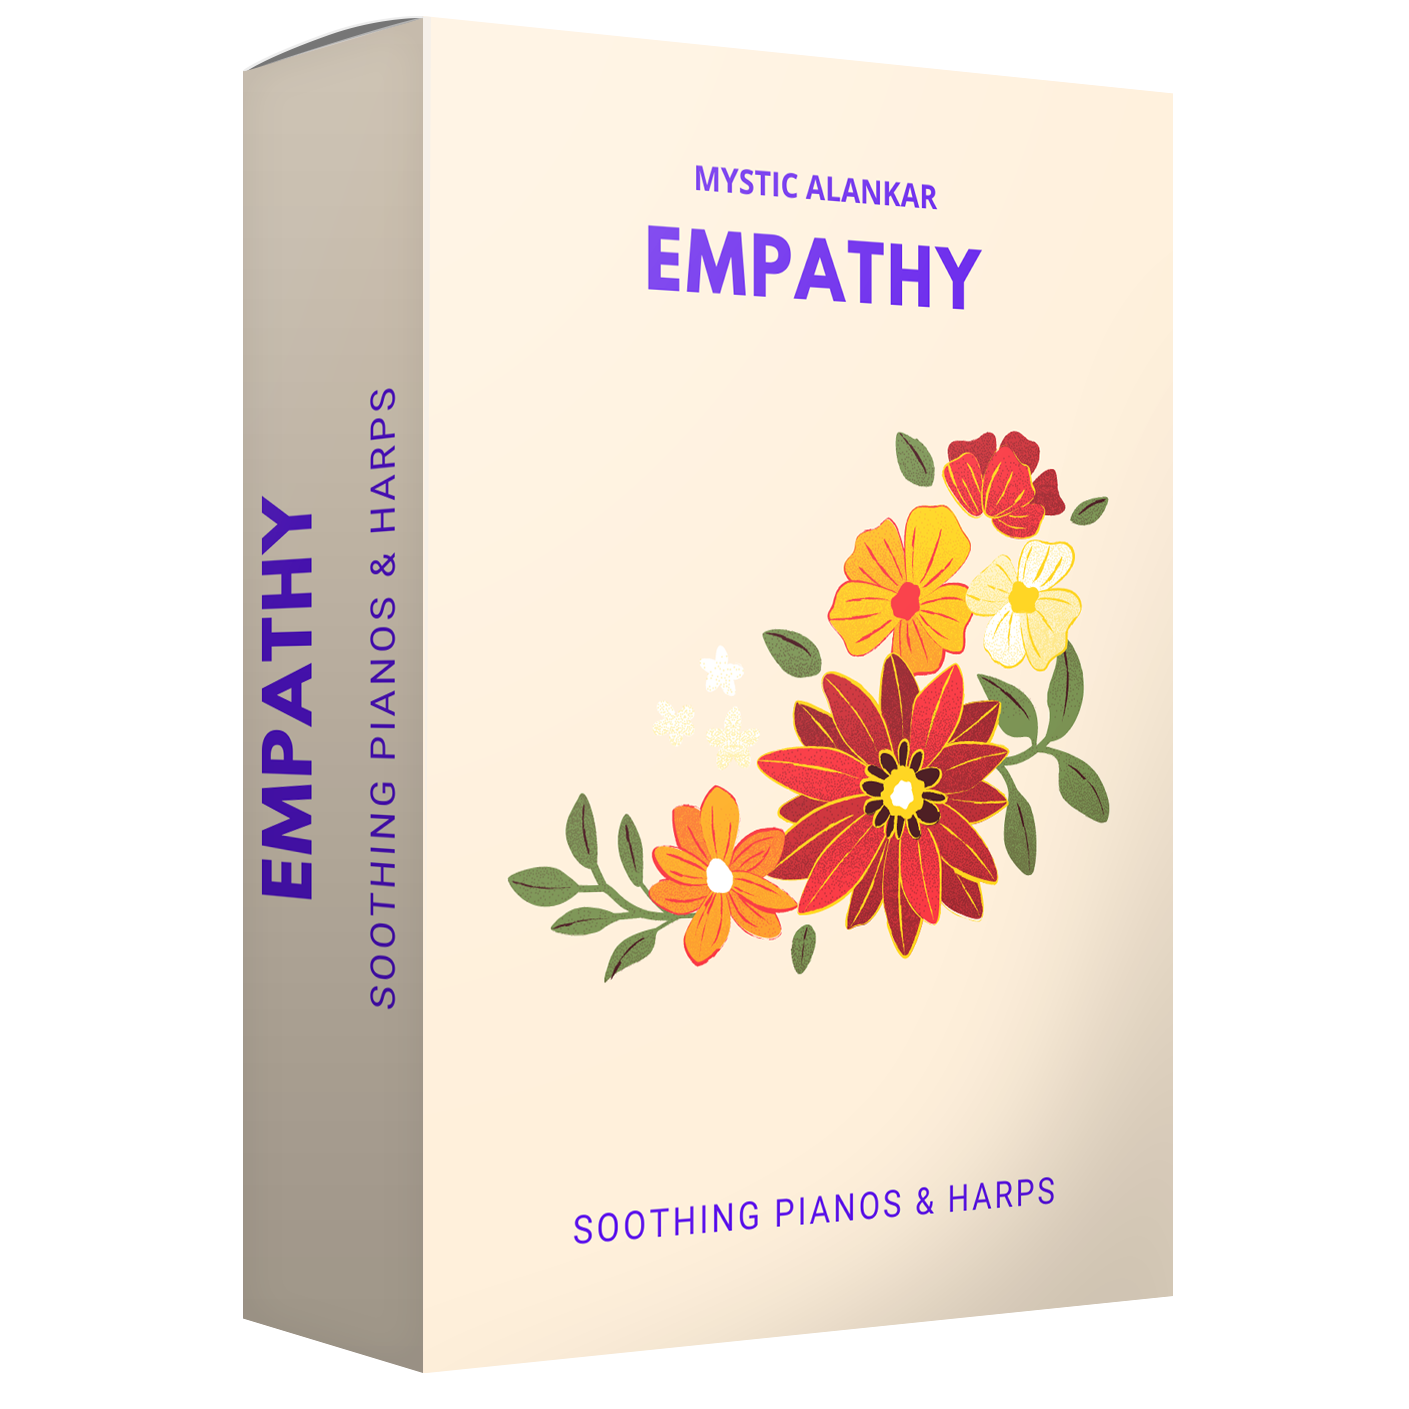 Empathy - Soothing Pianos & Harps